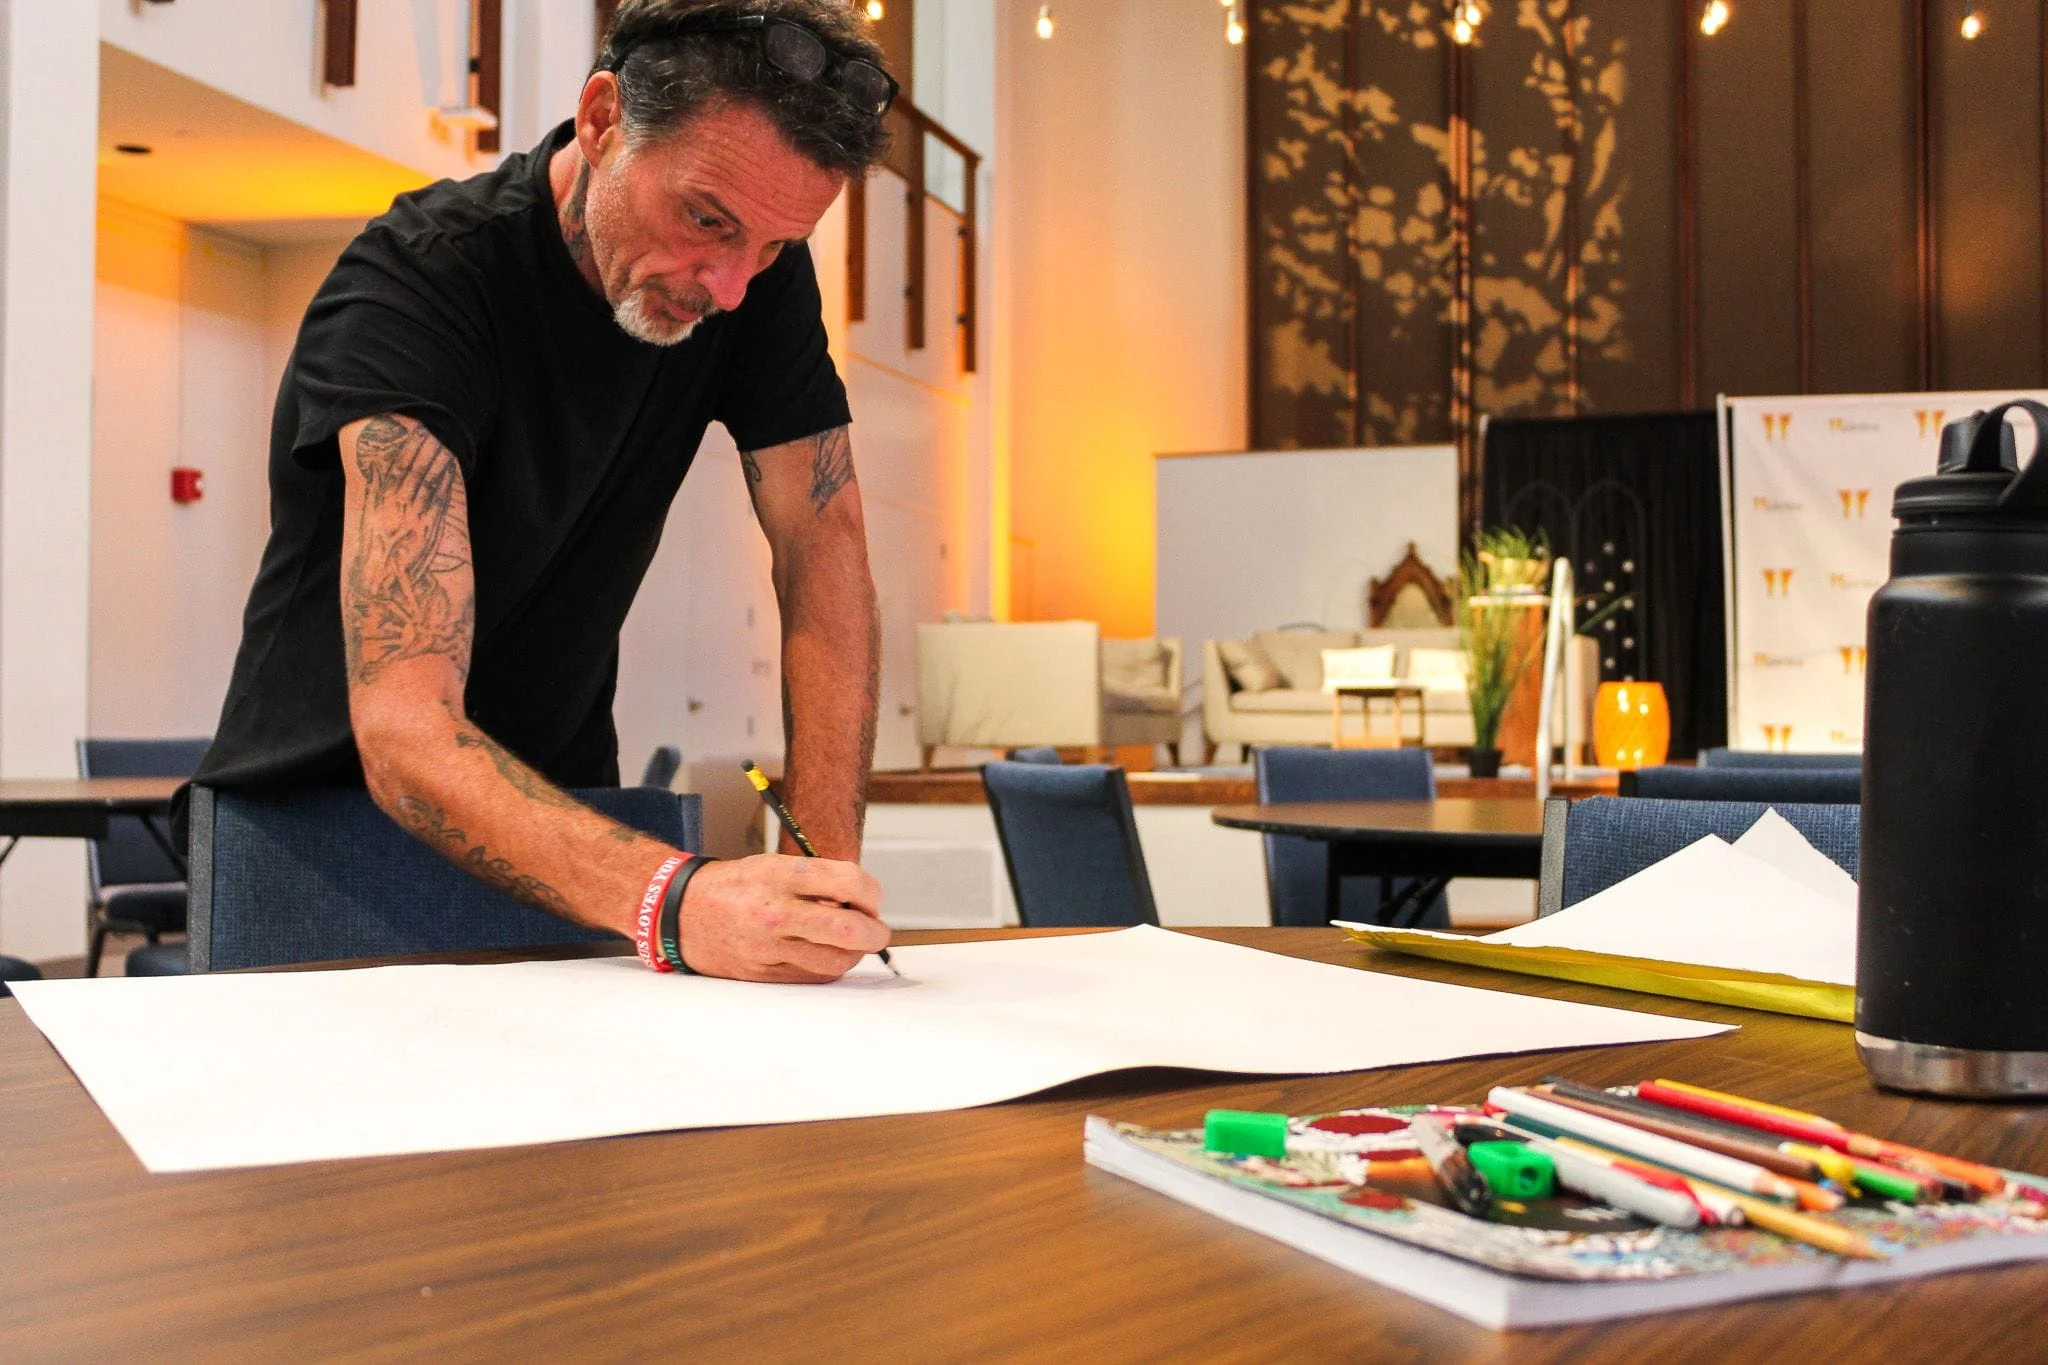 A man drawing on a large paper with art supplies on the table, and ambient lighting in the background.